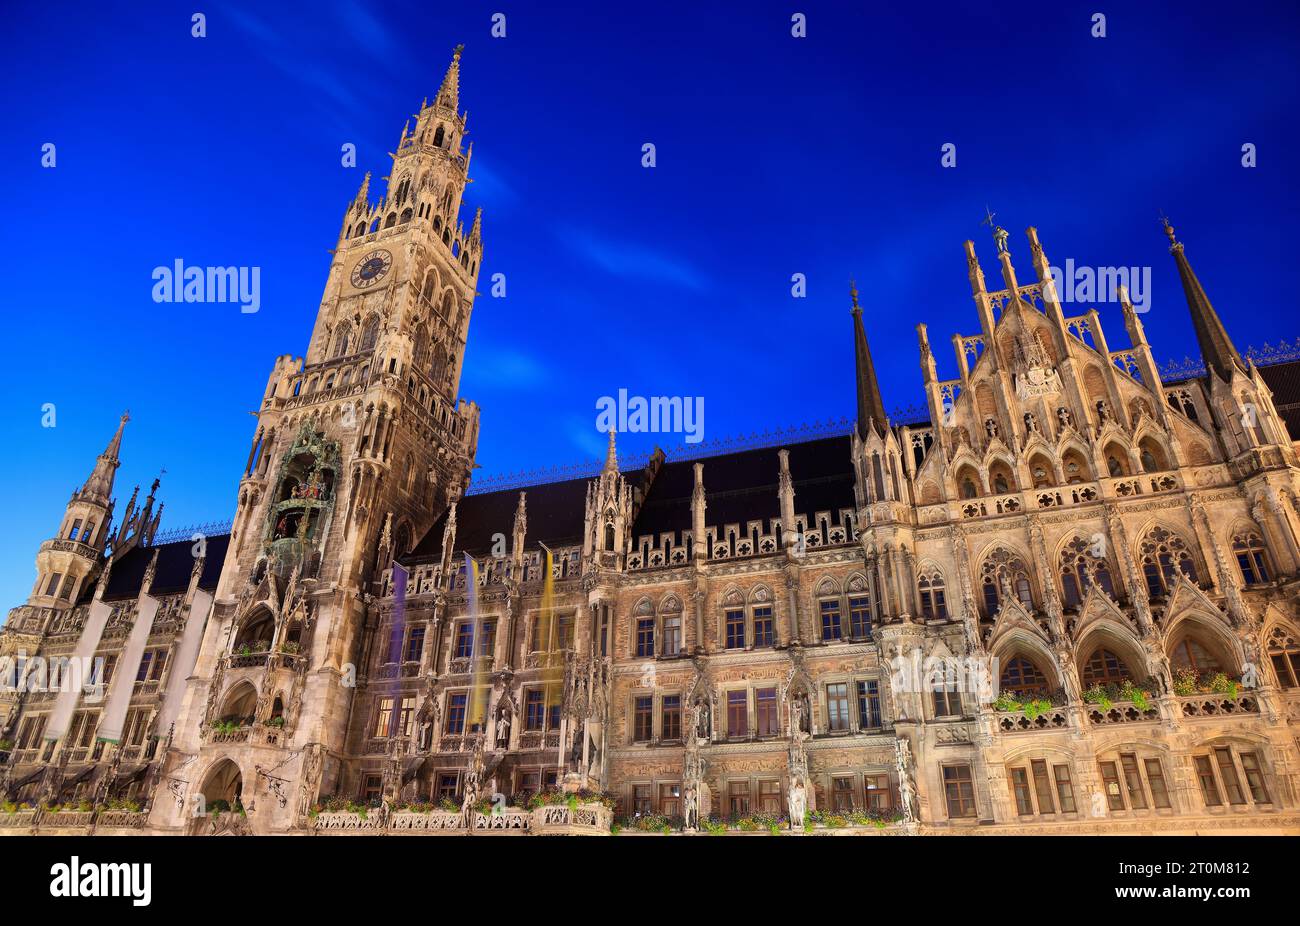 Mary's square illuminated at dusk in Munich, Germany with old town hall and other buildings Stock Photo